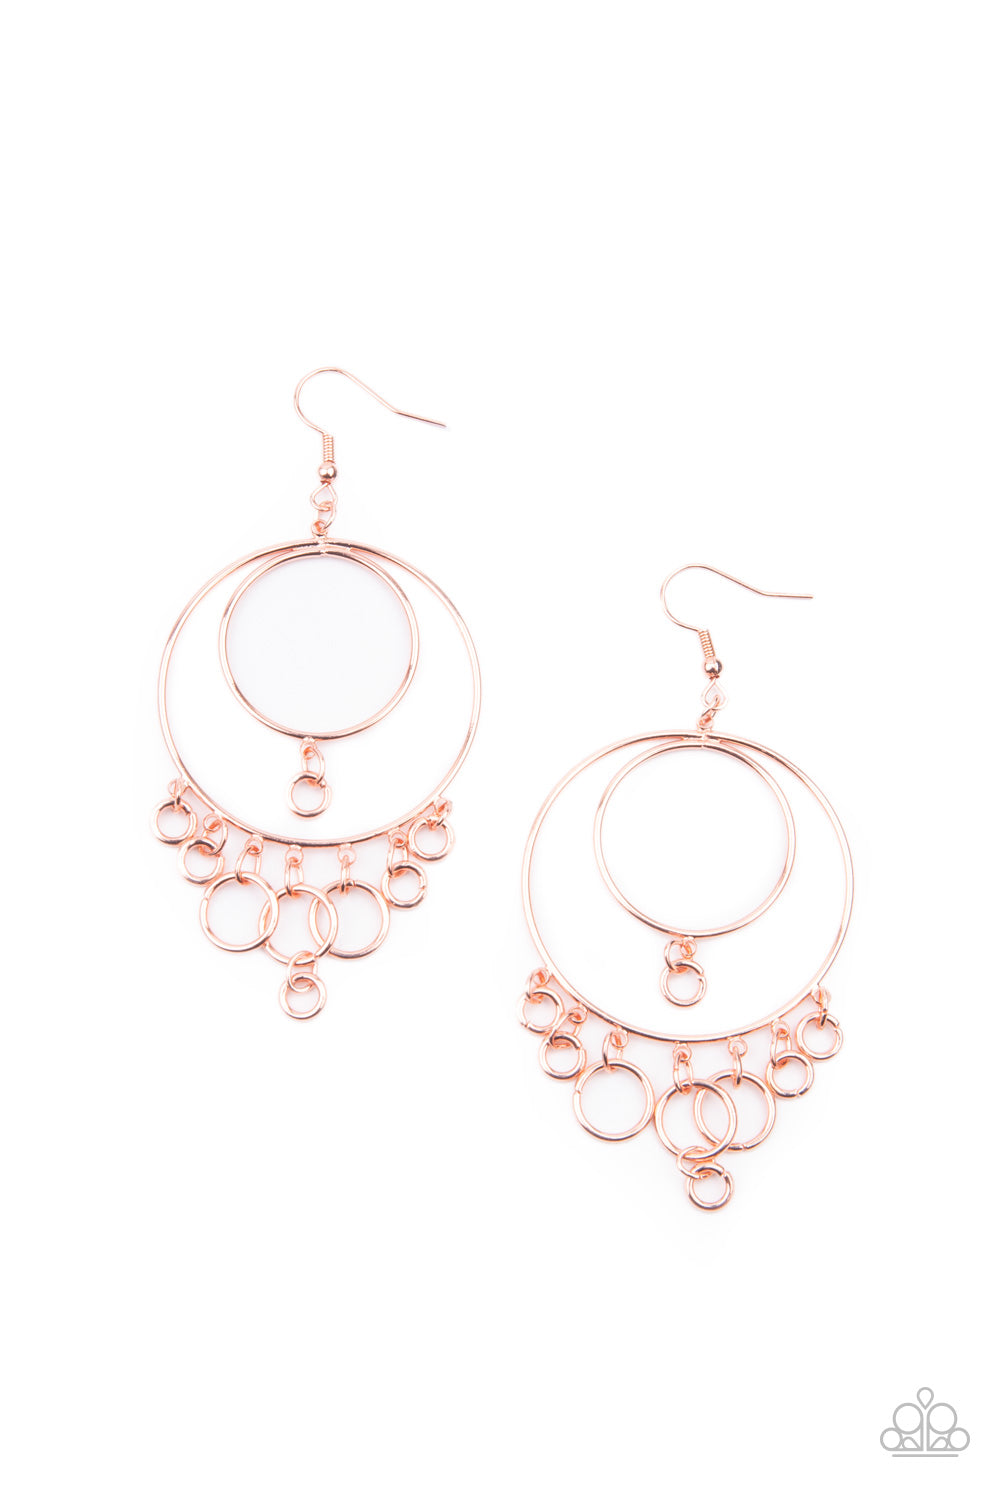 Roundabout Radiance - copper - Paparazzi earrings